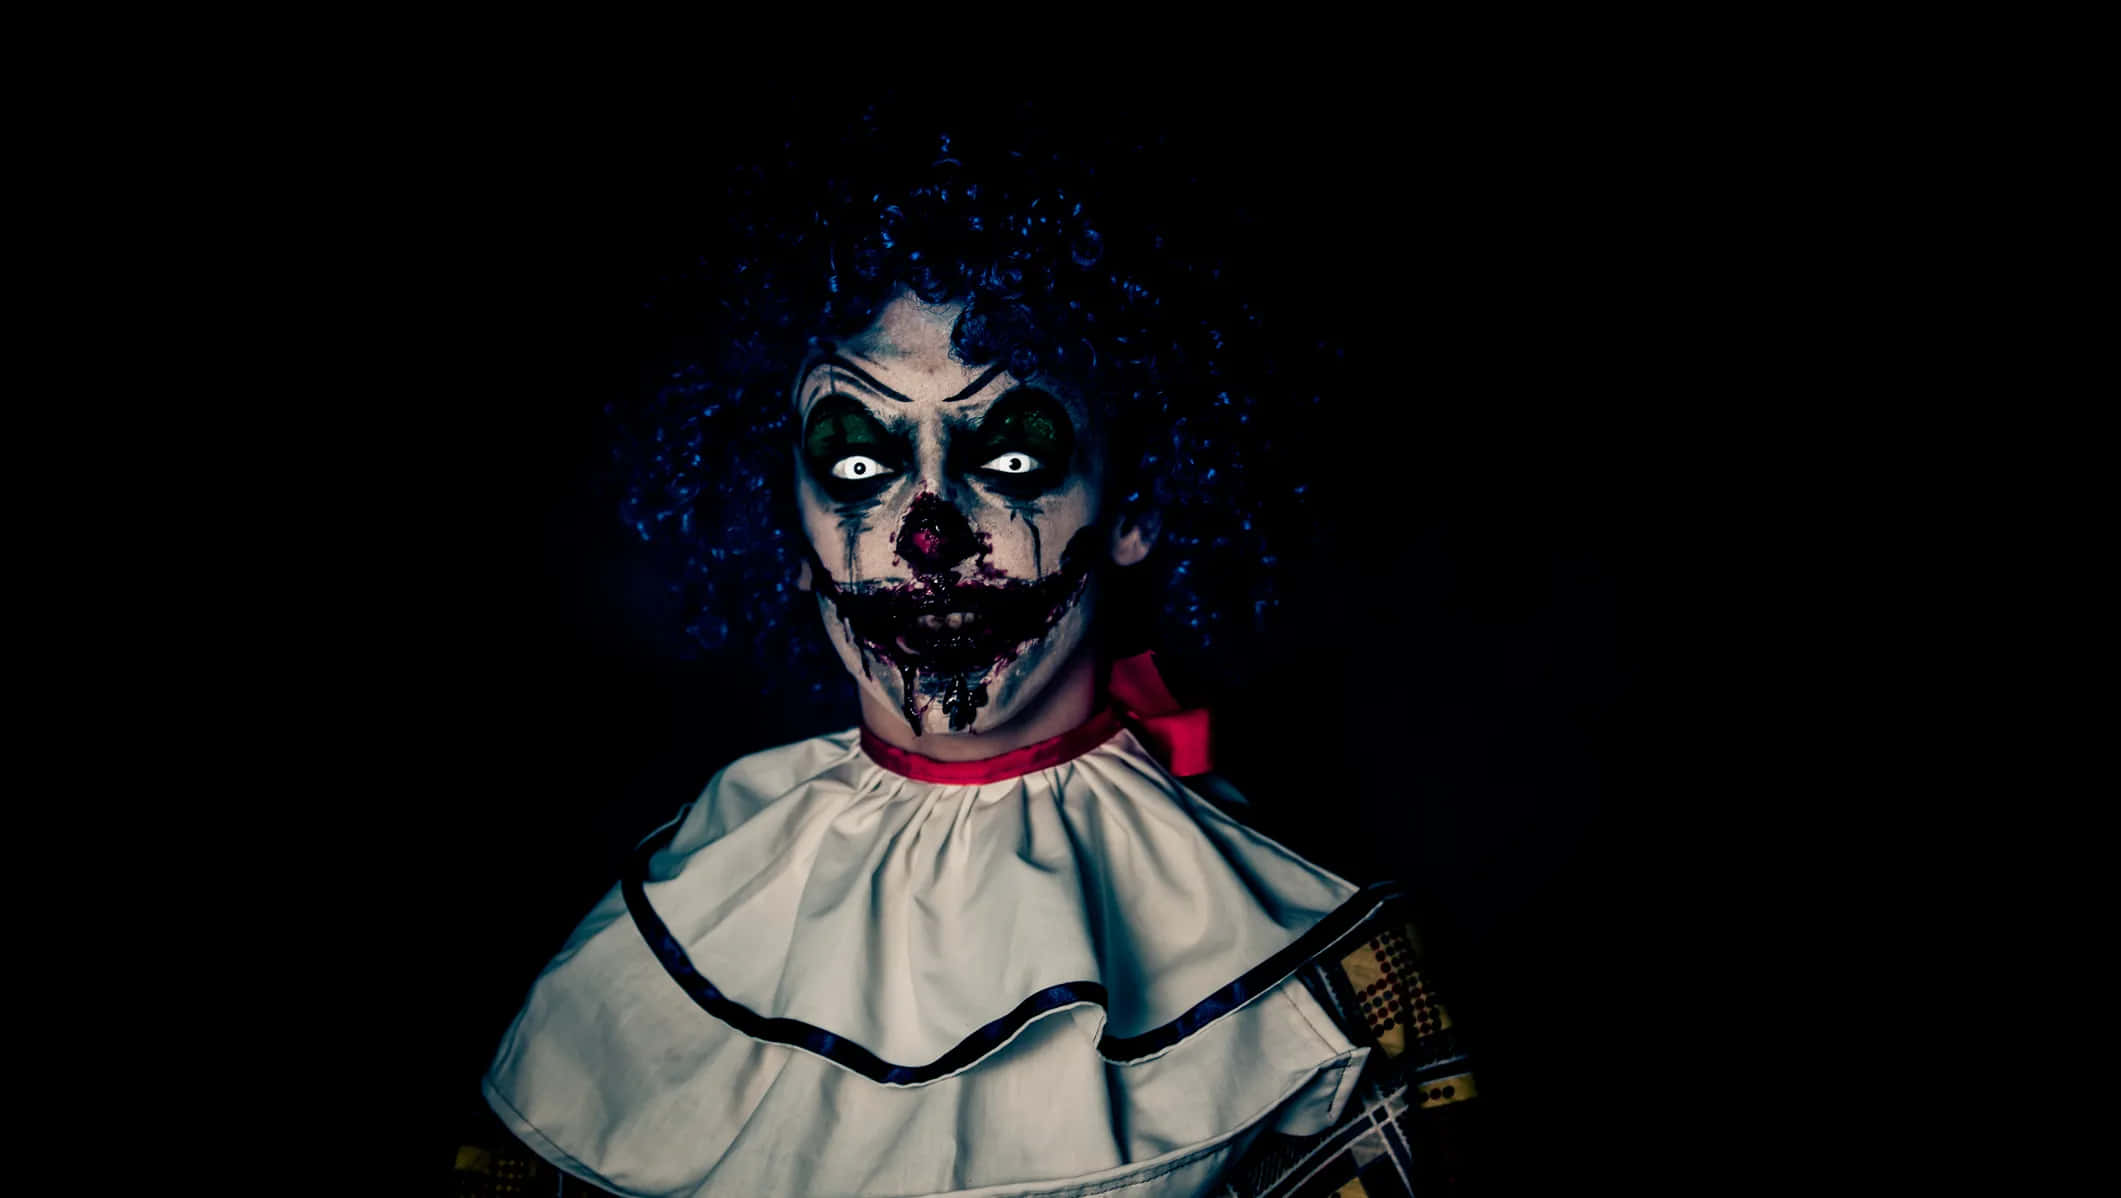 A terrifying clown stares ahead with a menacing smile.